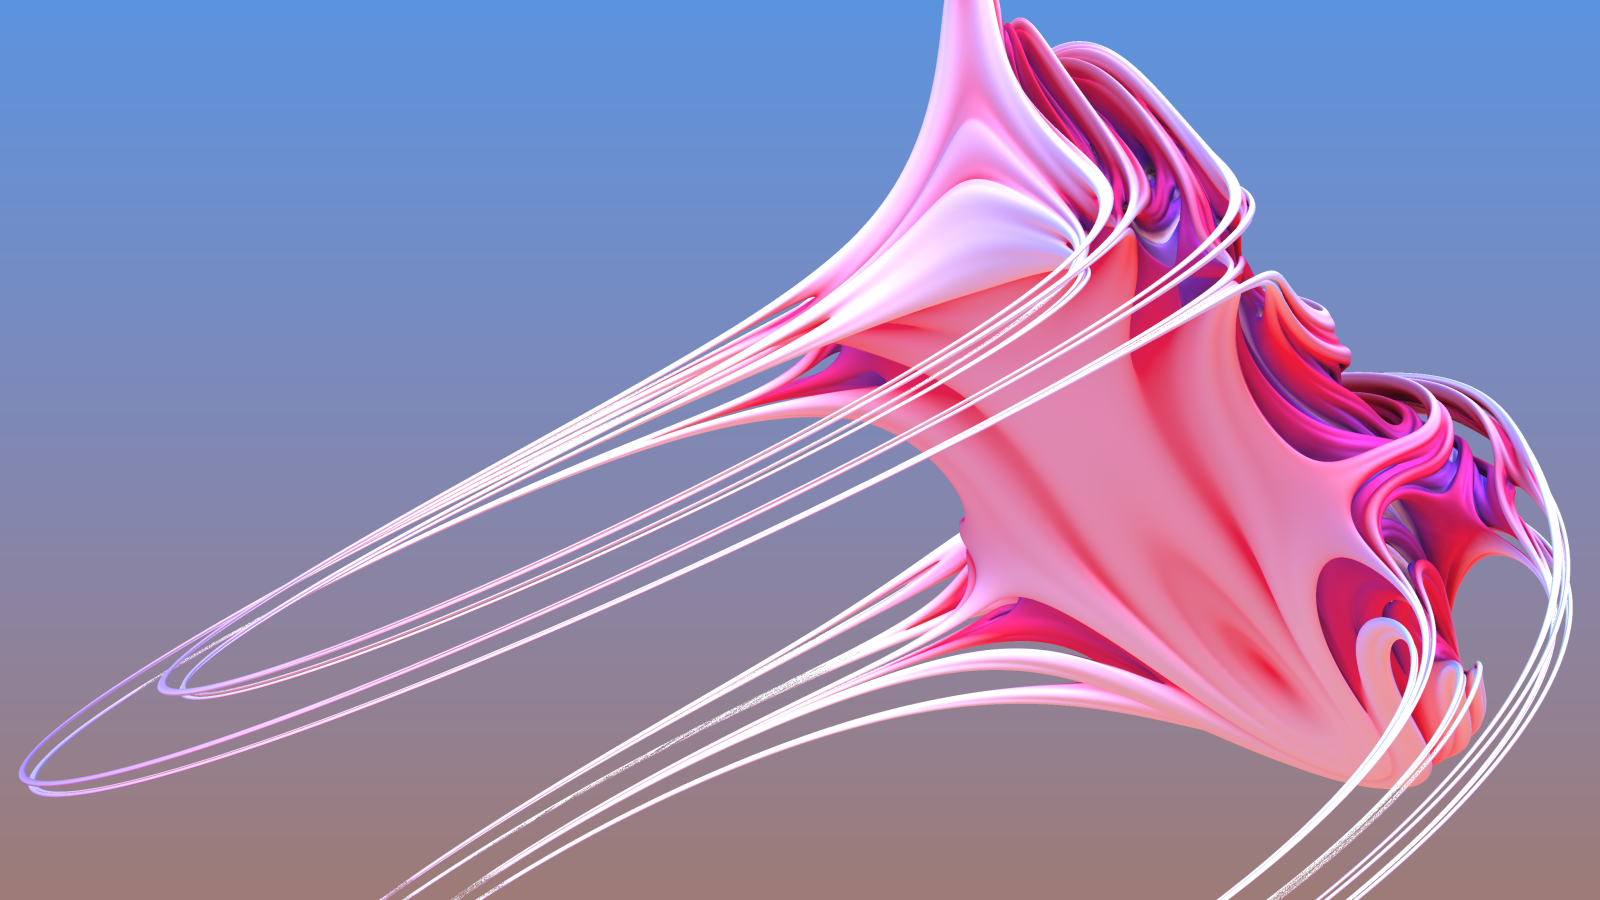 Pink abstract illustration on a blue background